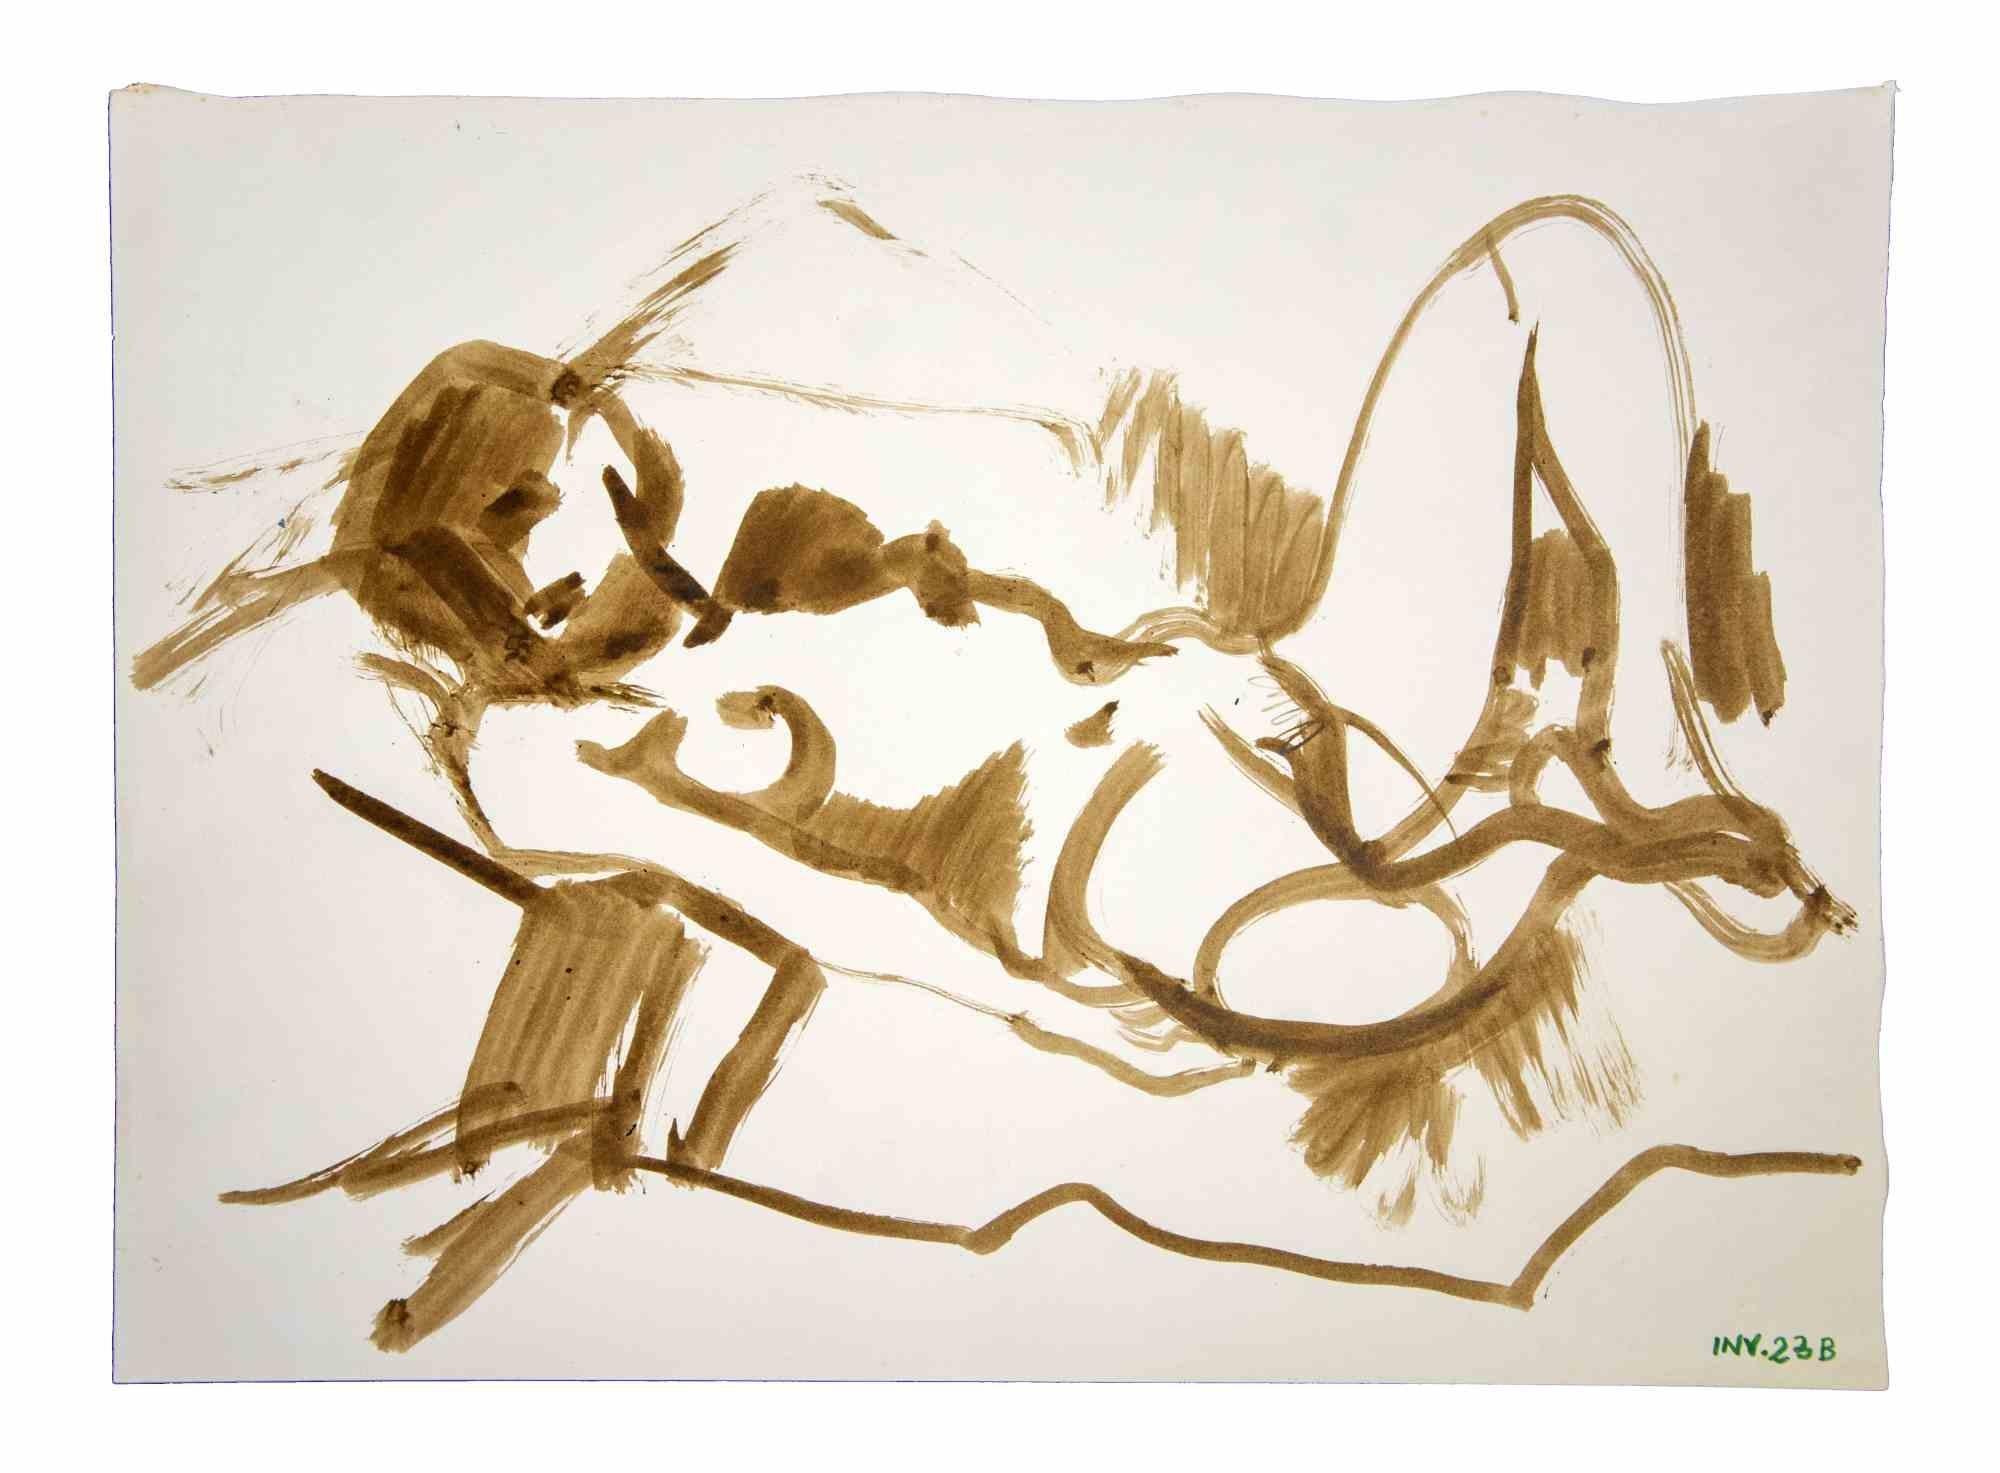 Reclined Nude is an original artwork realized in the 1980s by the Italian Contemporary artist  Leo Guida  (1992 - 2017).

Original drawings in Watercolor on paper.

Good conditions but aged.

The artwork is depicted through strong strokes in